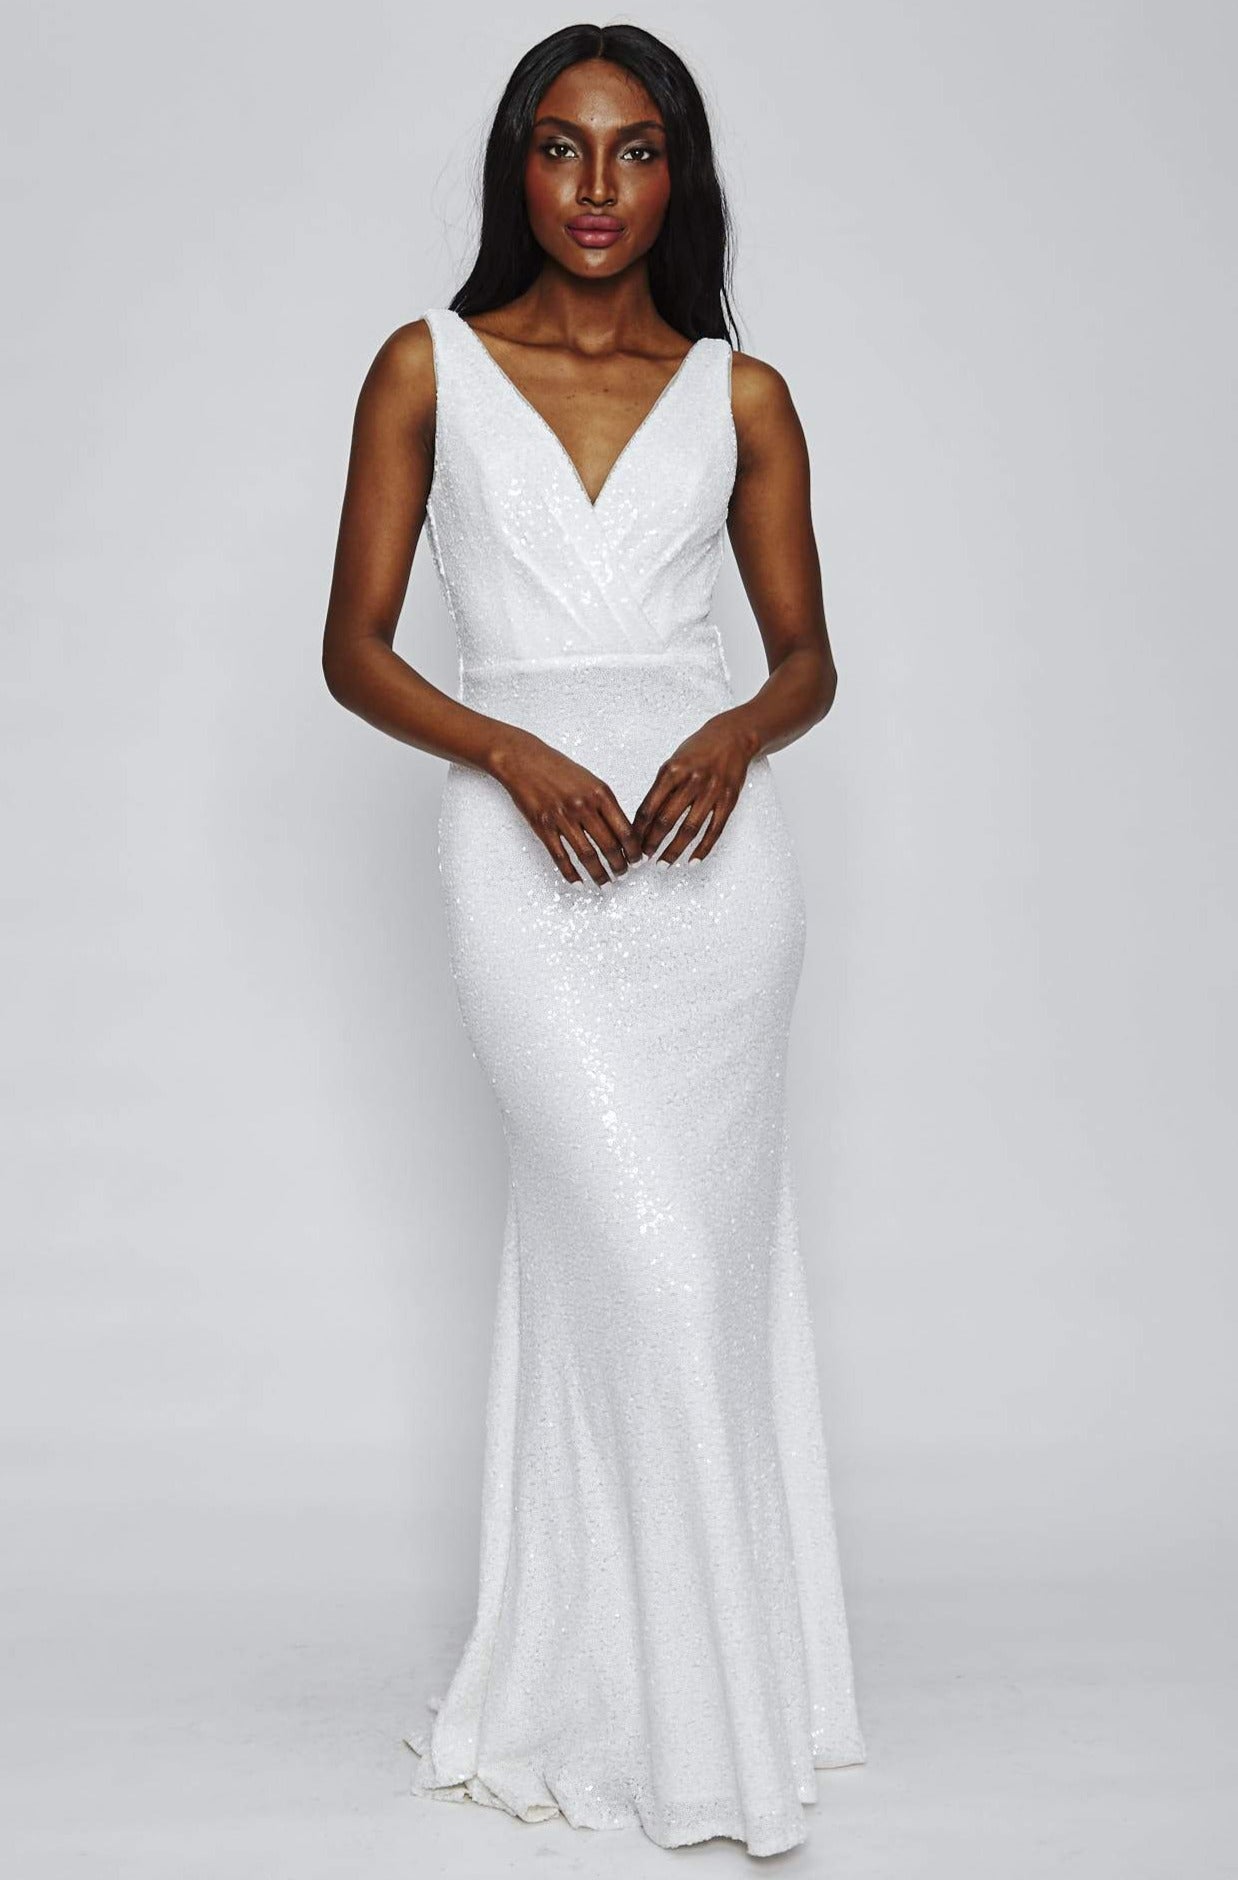 Sun White Sequin Cowl Back Gown by Theia Couture - RENTAL